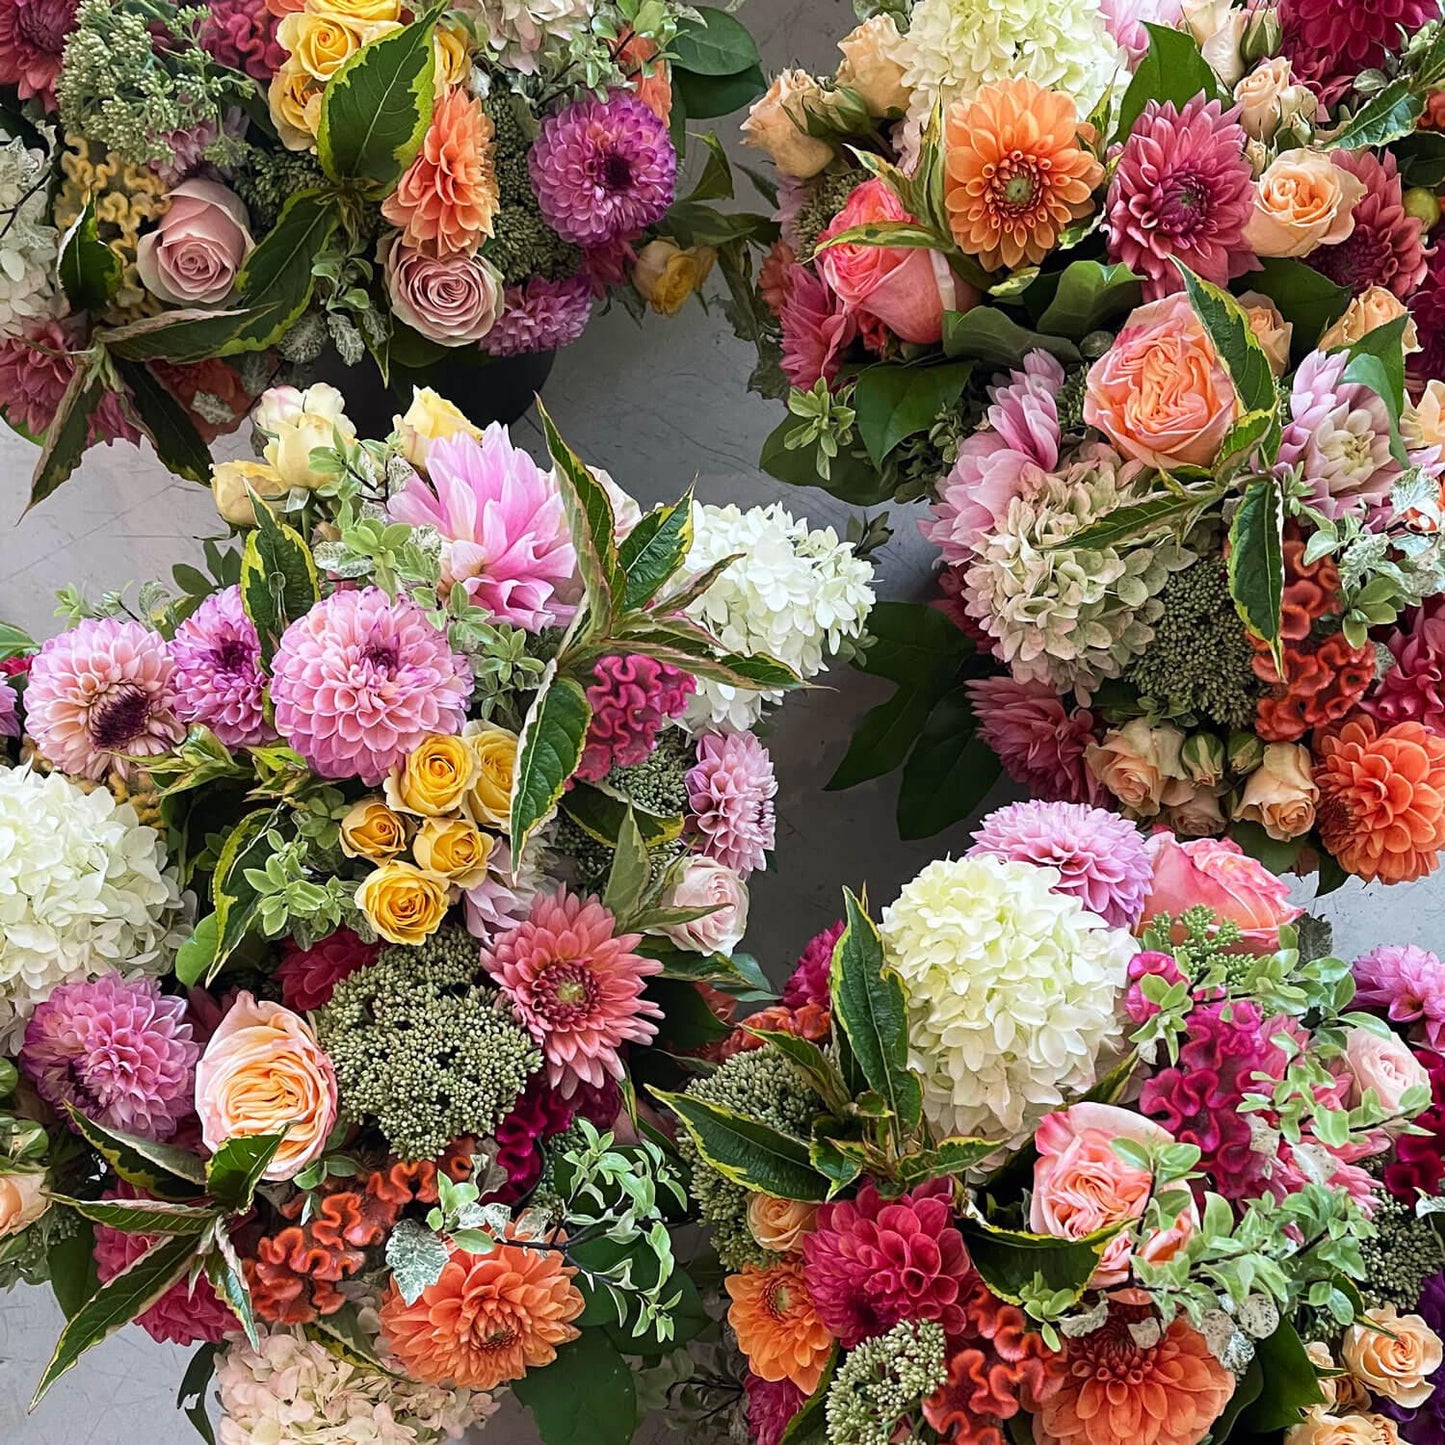 Wonderblooms monthly flower subscription from Quince Flowers, Toronto Florist and flower delivery - bouquets of colourful flowers. Order online for flower & plant subscriptions from the best florist in Toronto near you.